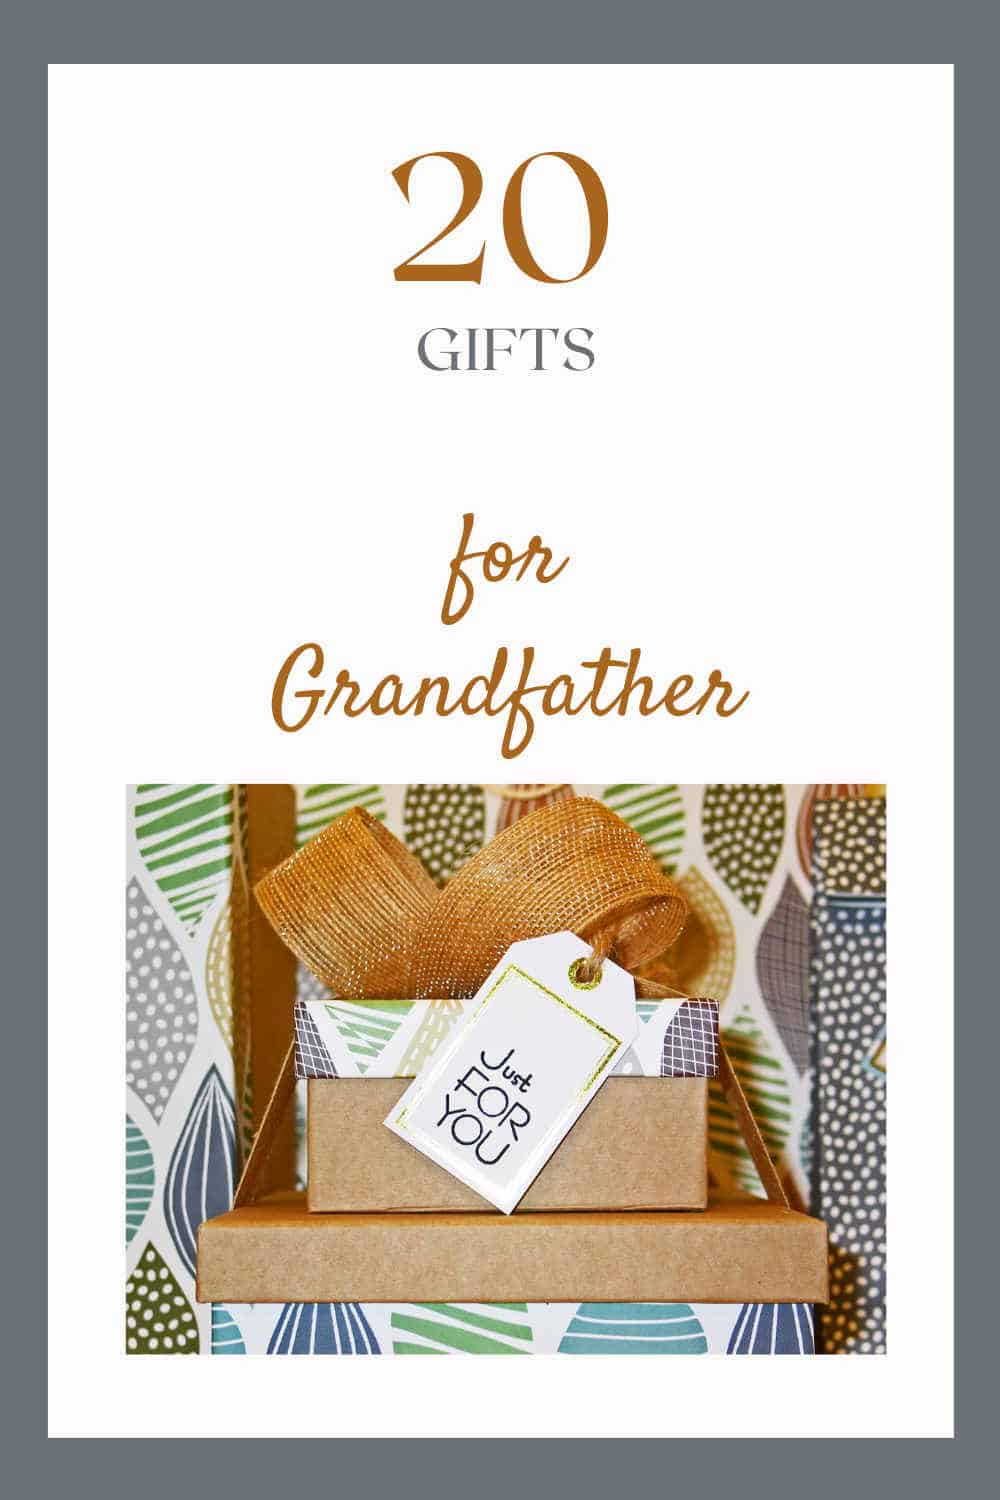 Are you having a hard time choosing meaningful gifts for Grandpa? Regardless of the occasions – birthday, Christmas, Father’s Day - we have compiled a top 20 gift ideas to solve the difficulty for you!